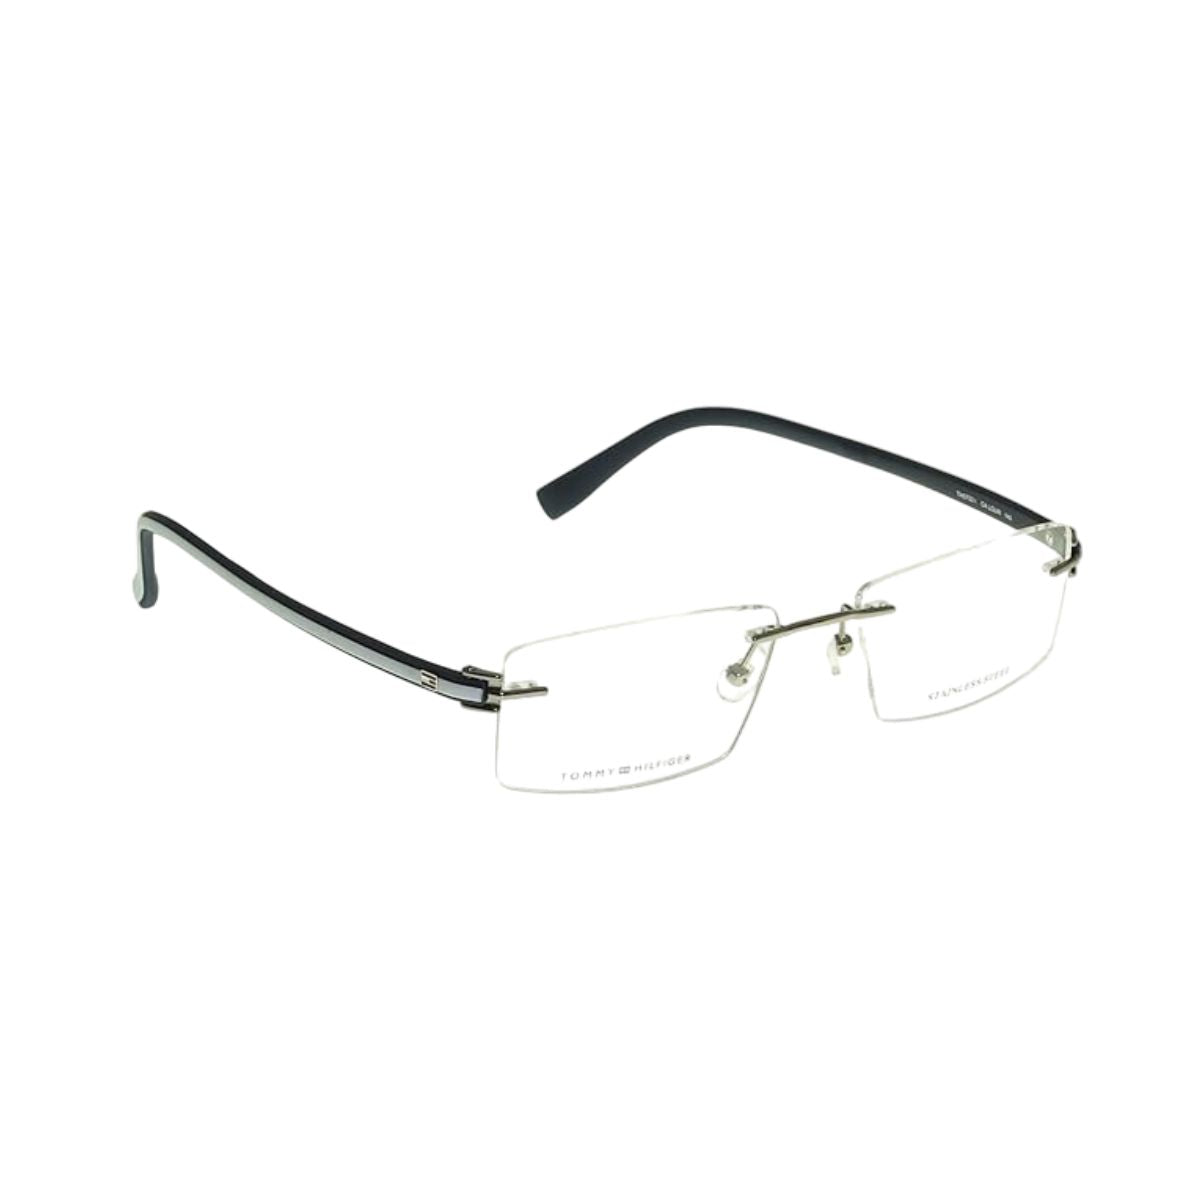 "buy Tommy Hilfiger 5733 C4  latest frames of spectacles for men's and women's at optorium"